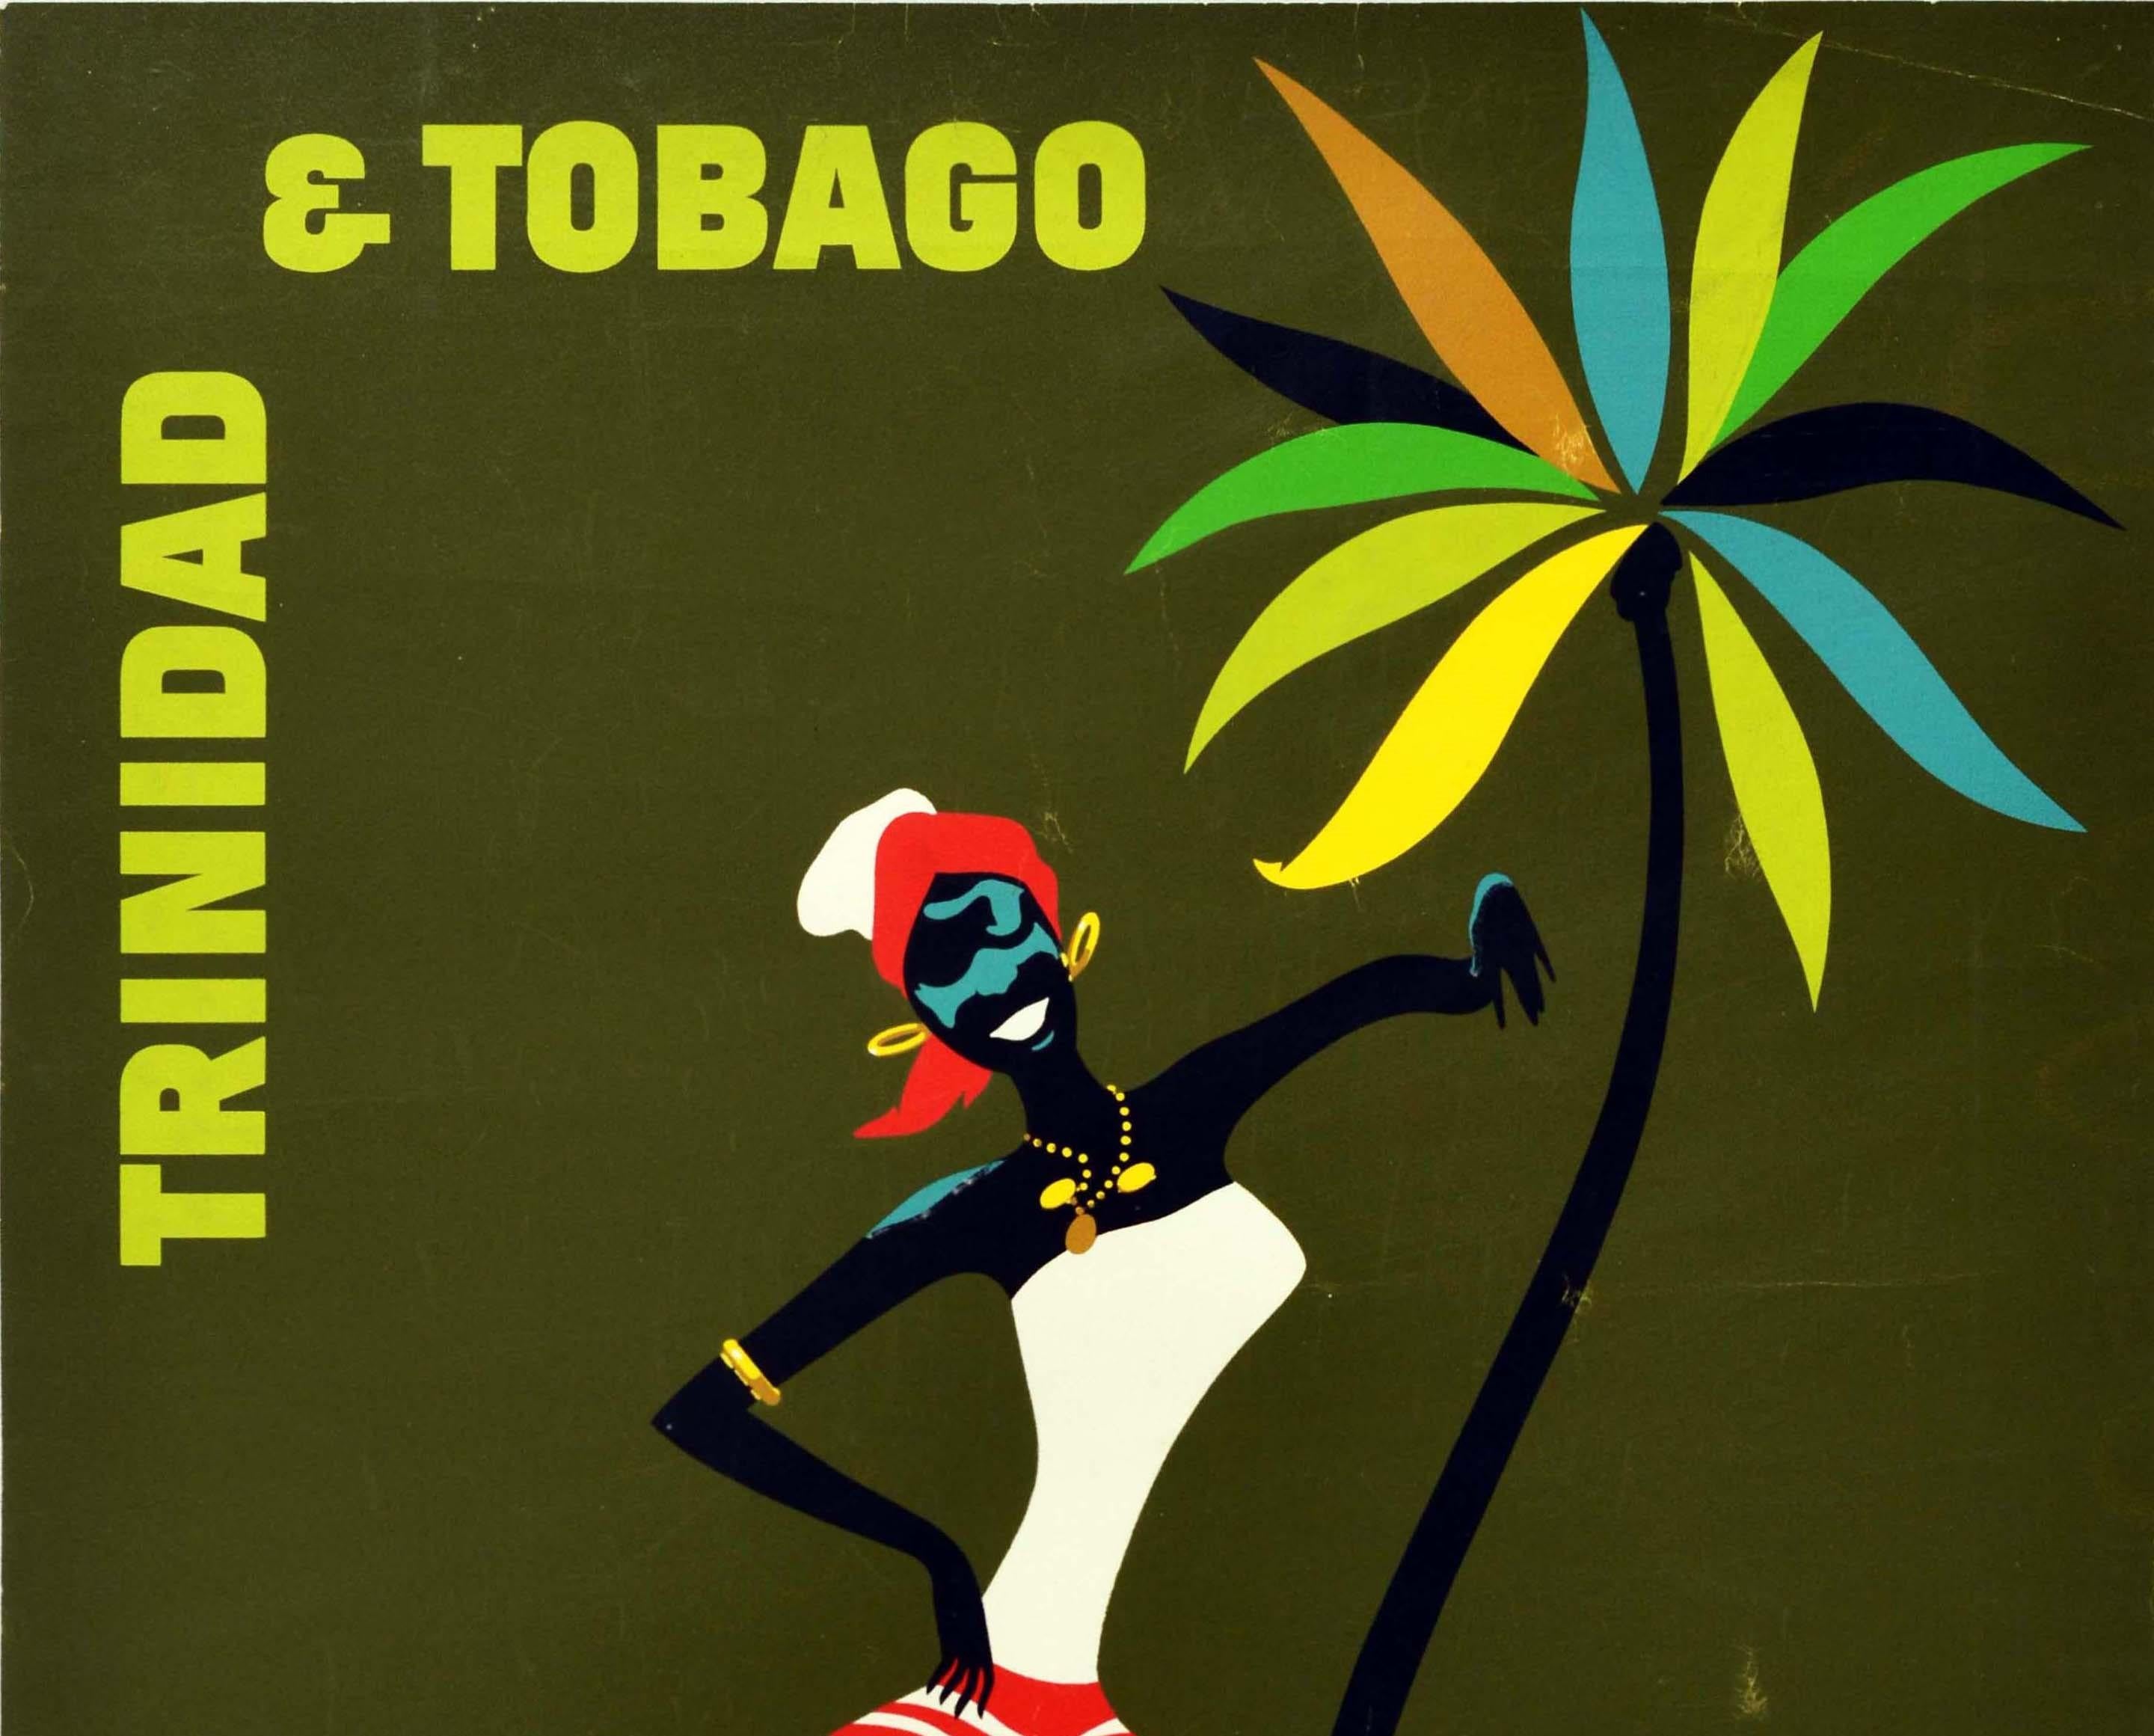 Original vintage travel poster for Trinidad & Tobago featuring great artwork depicting a lady dancing and smiling to the viewer in front of a stylised palm tree against a deep green background, the title text along the top corner and rest of the